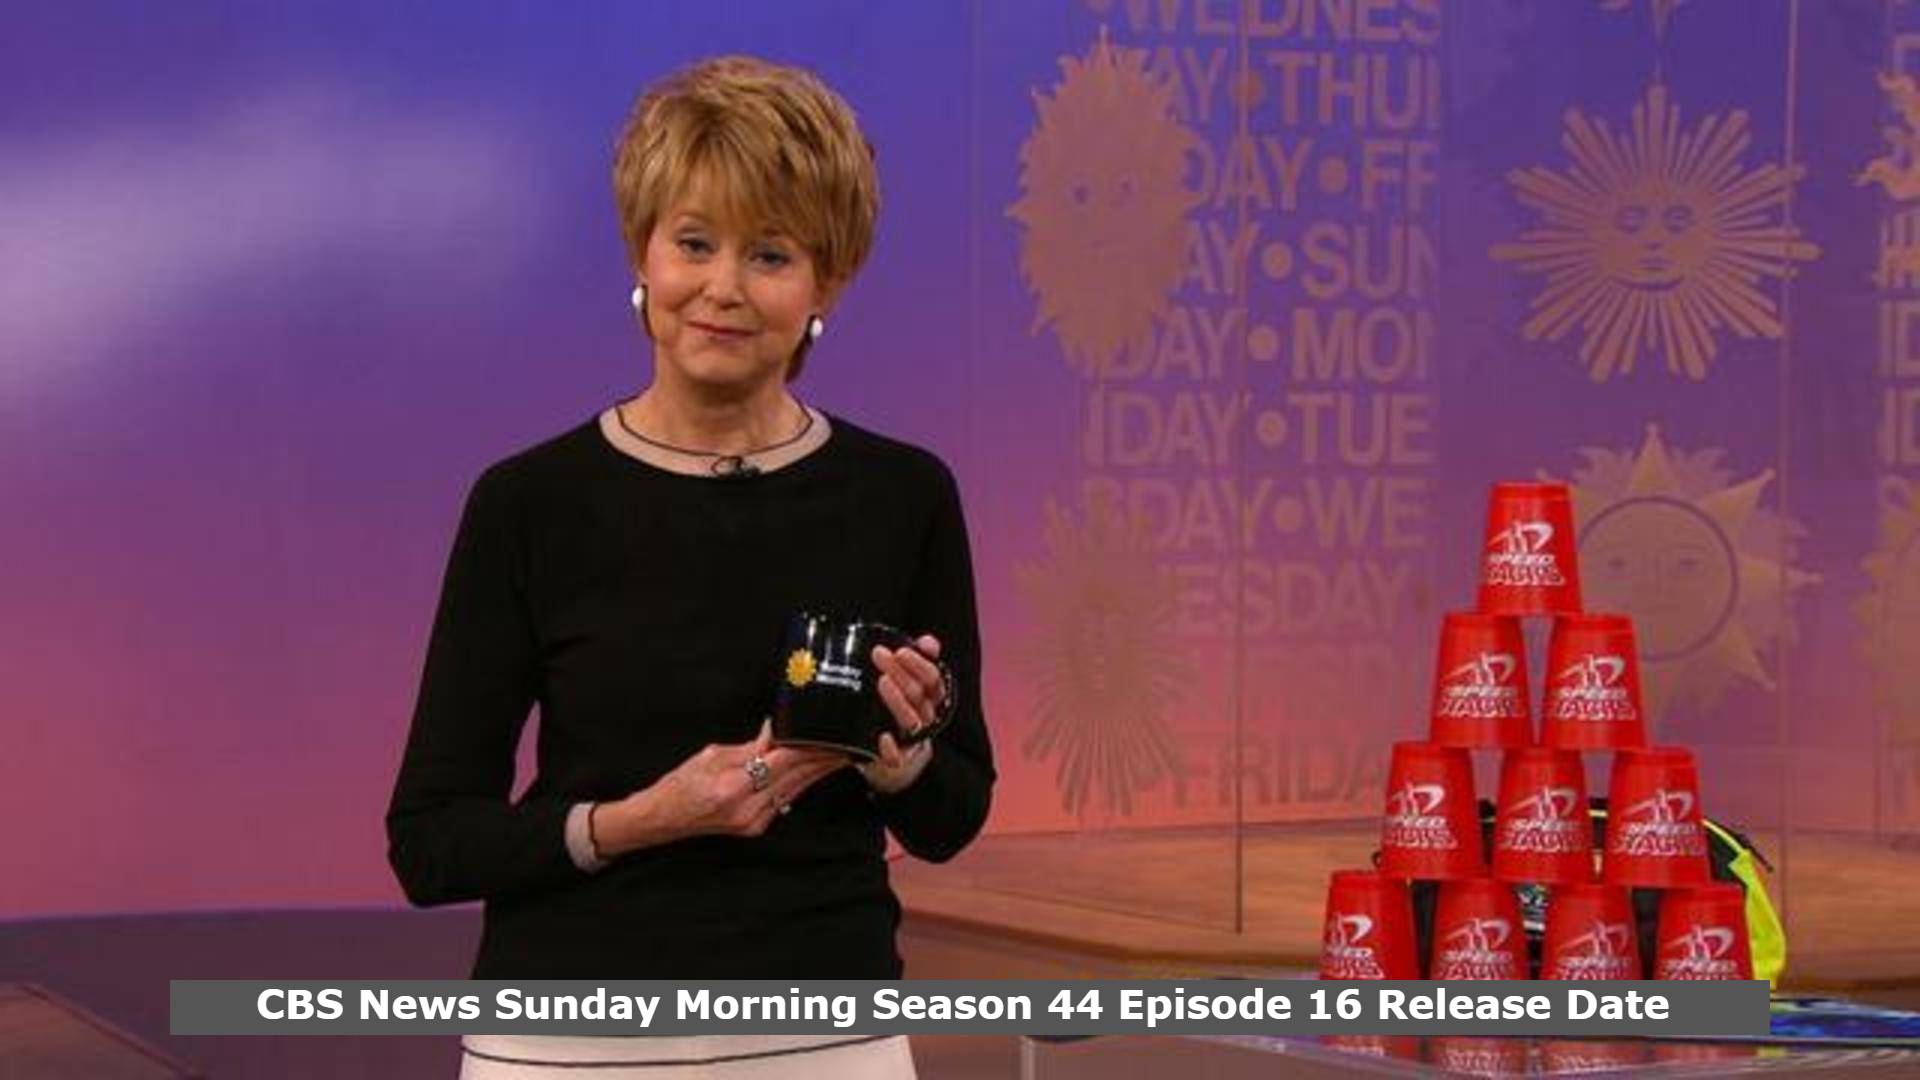 CBS News Sunday Morning Season 44 Episode 16 Release Date and Time, Countdown, When Is It Coming Out?